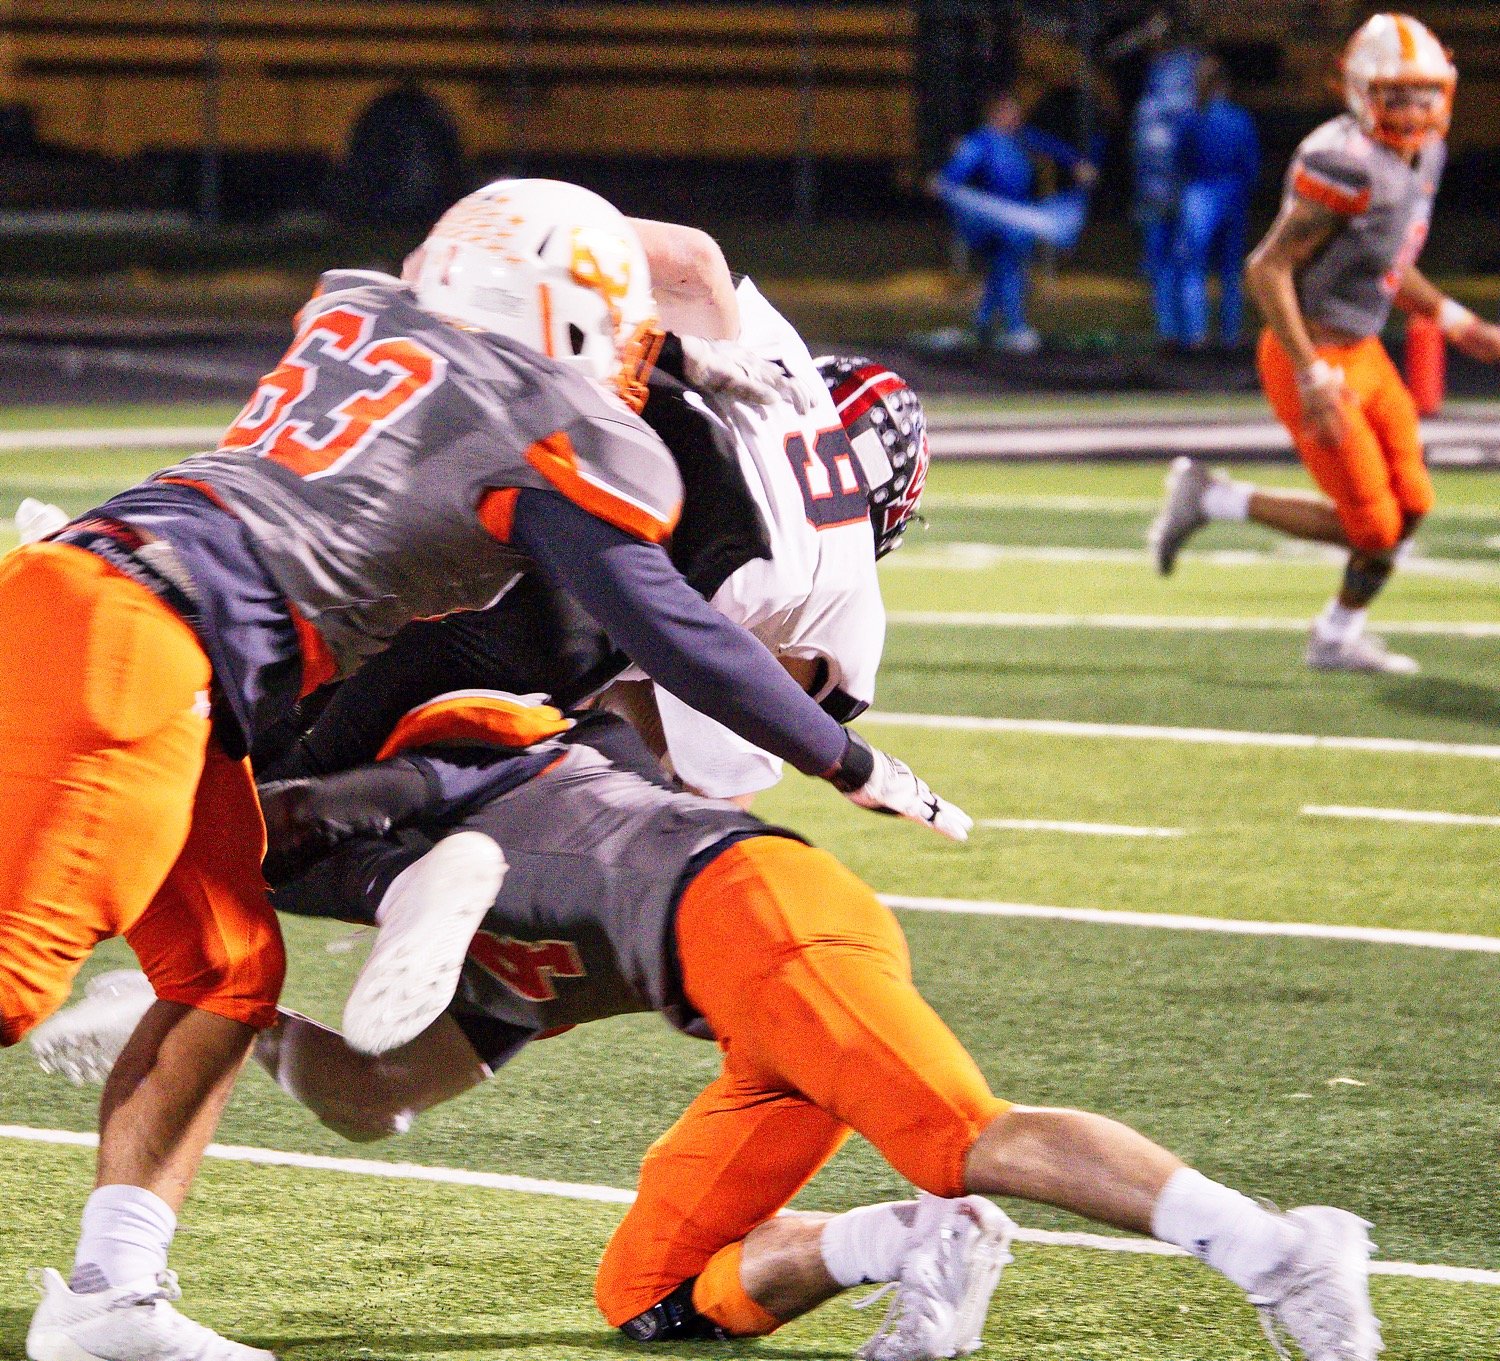 Cole Thompson (63) and Coy Anderson upend the Trojan ballcarrier. [view more from Forney]